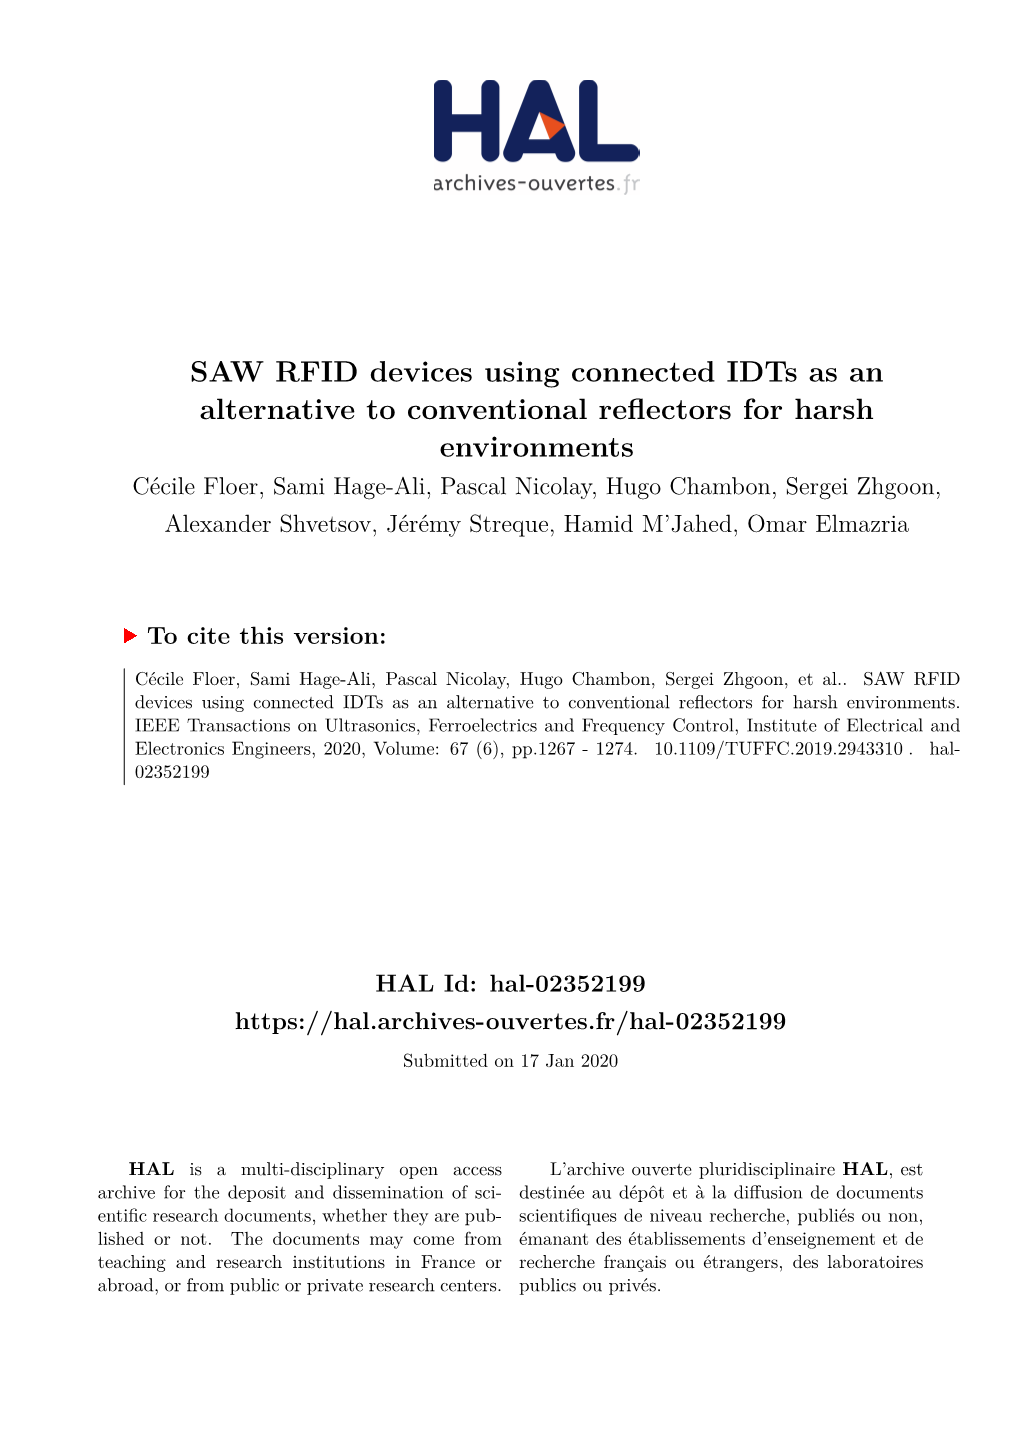 SAW RFID Devices Using Connected Idts As an Alternative to Conventional Reflectors for Harsh Environments